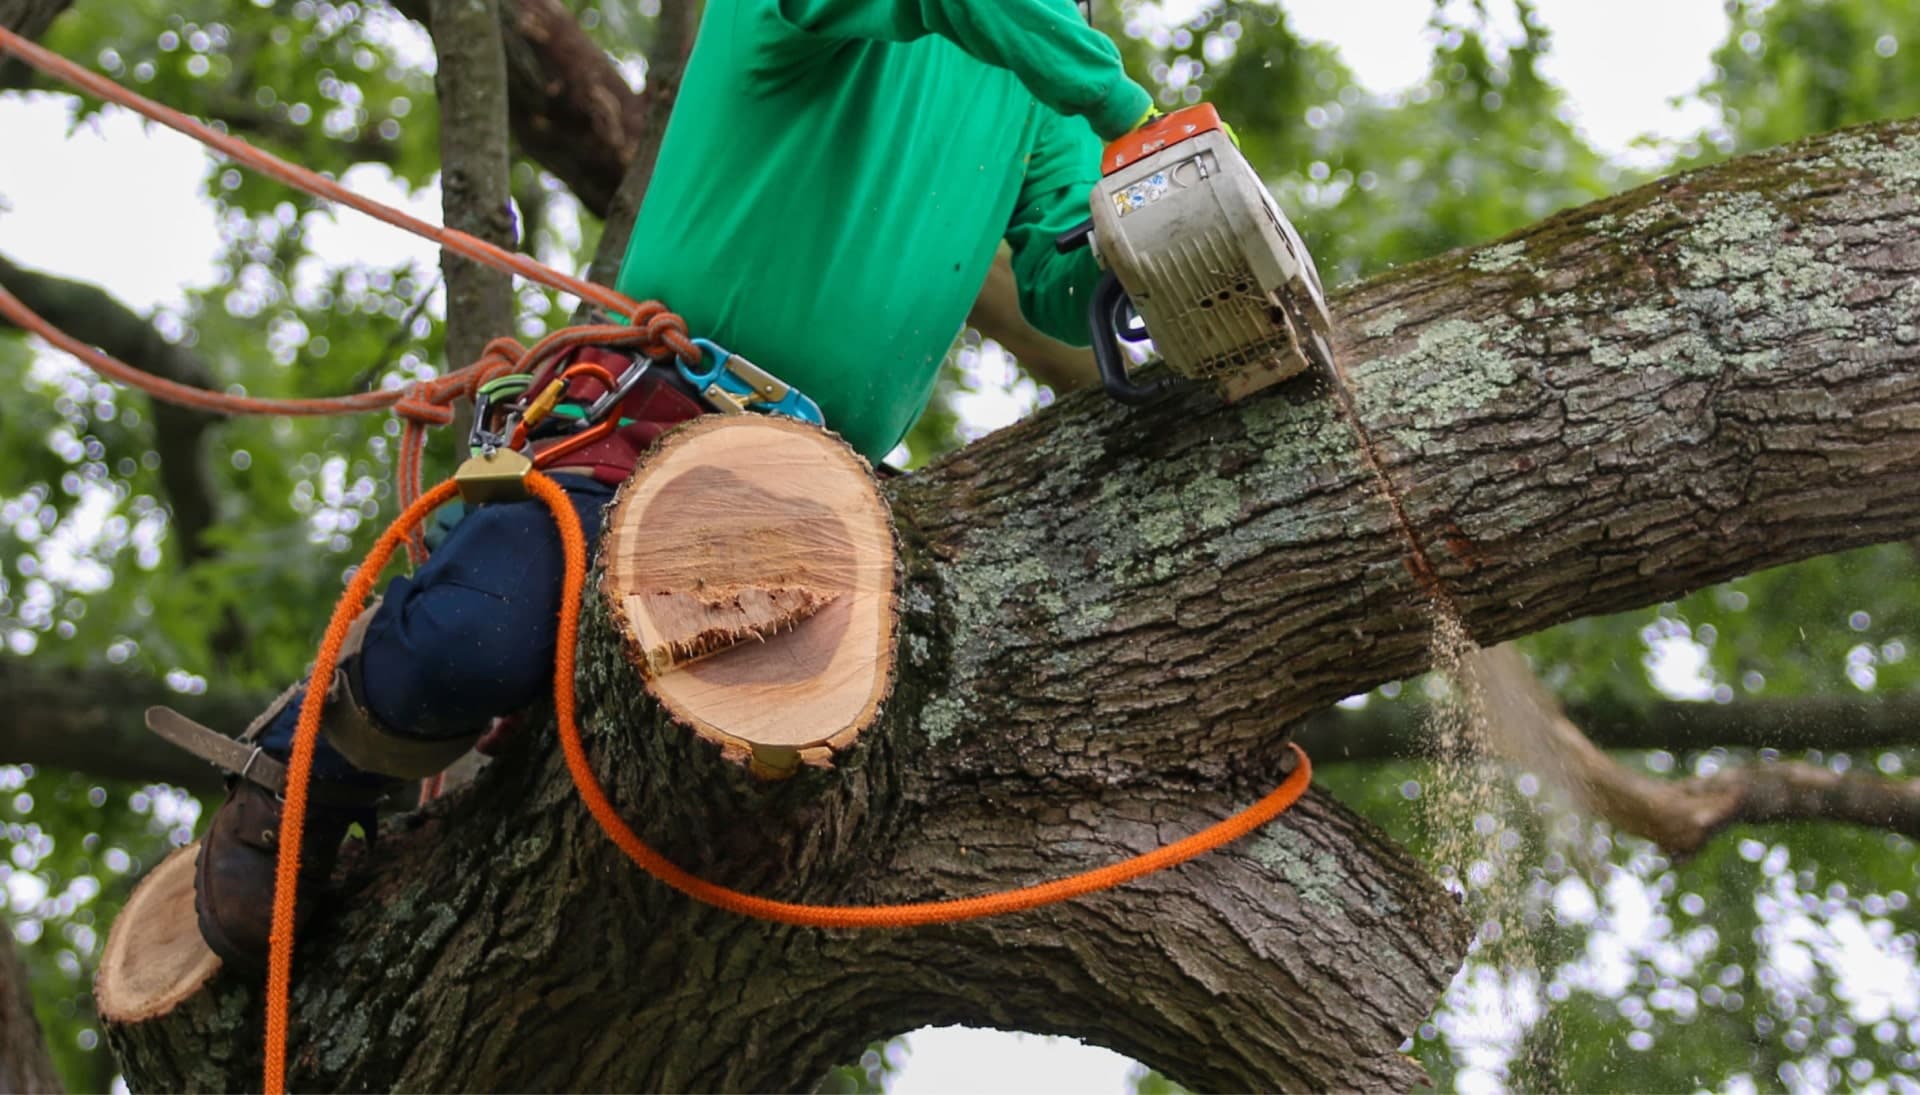 Shed your worries away with best tree removal in Goldsboro